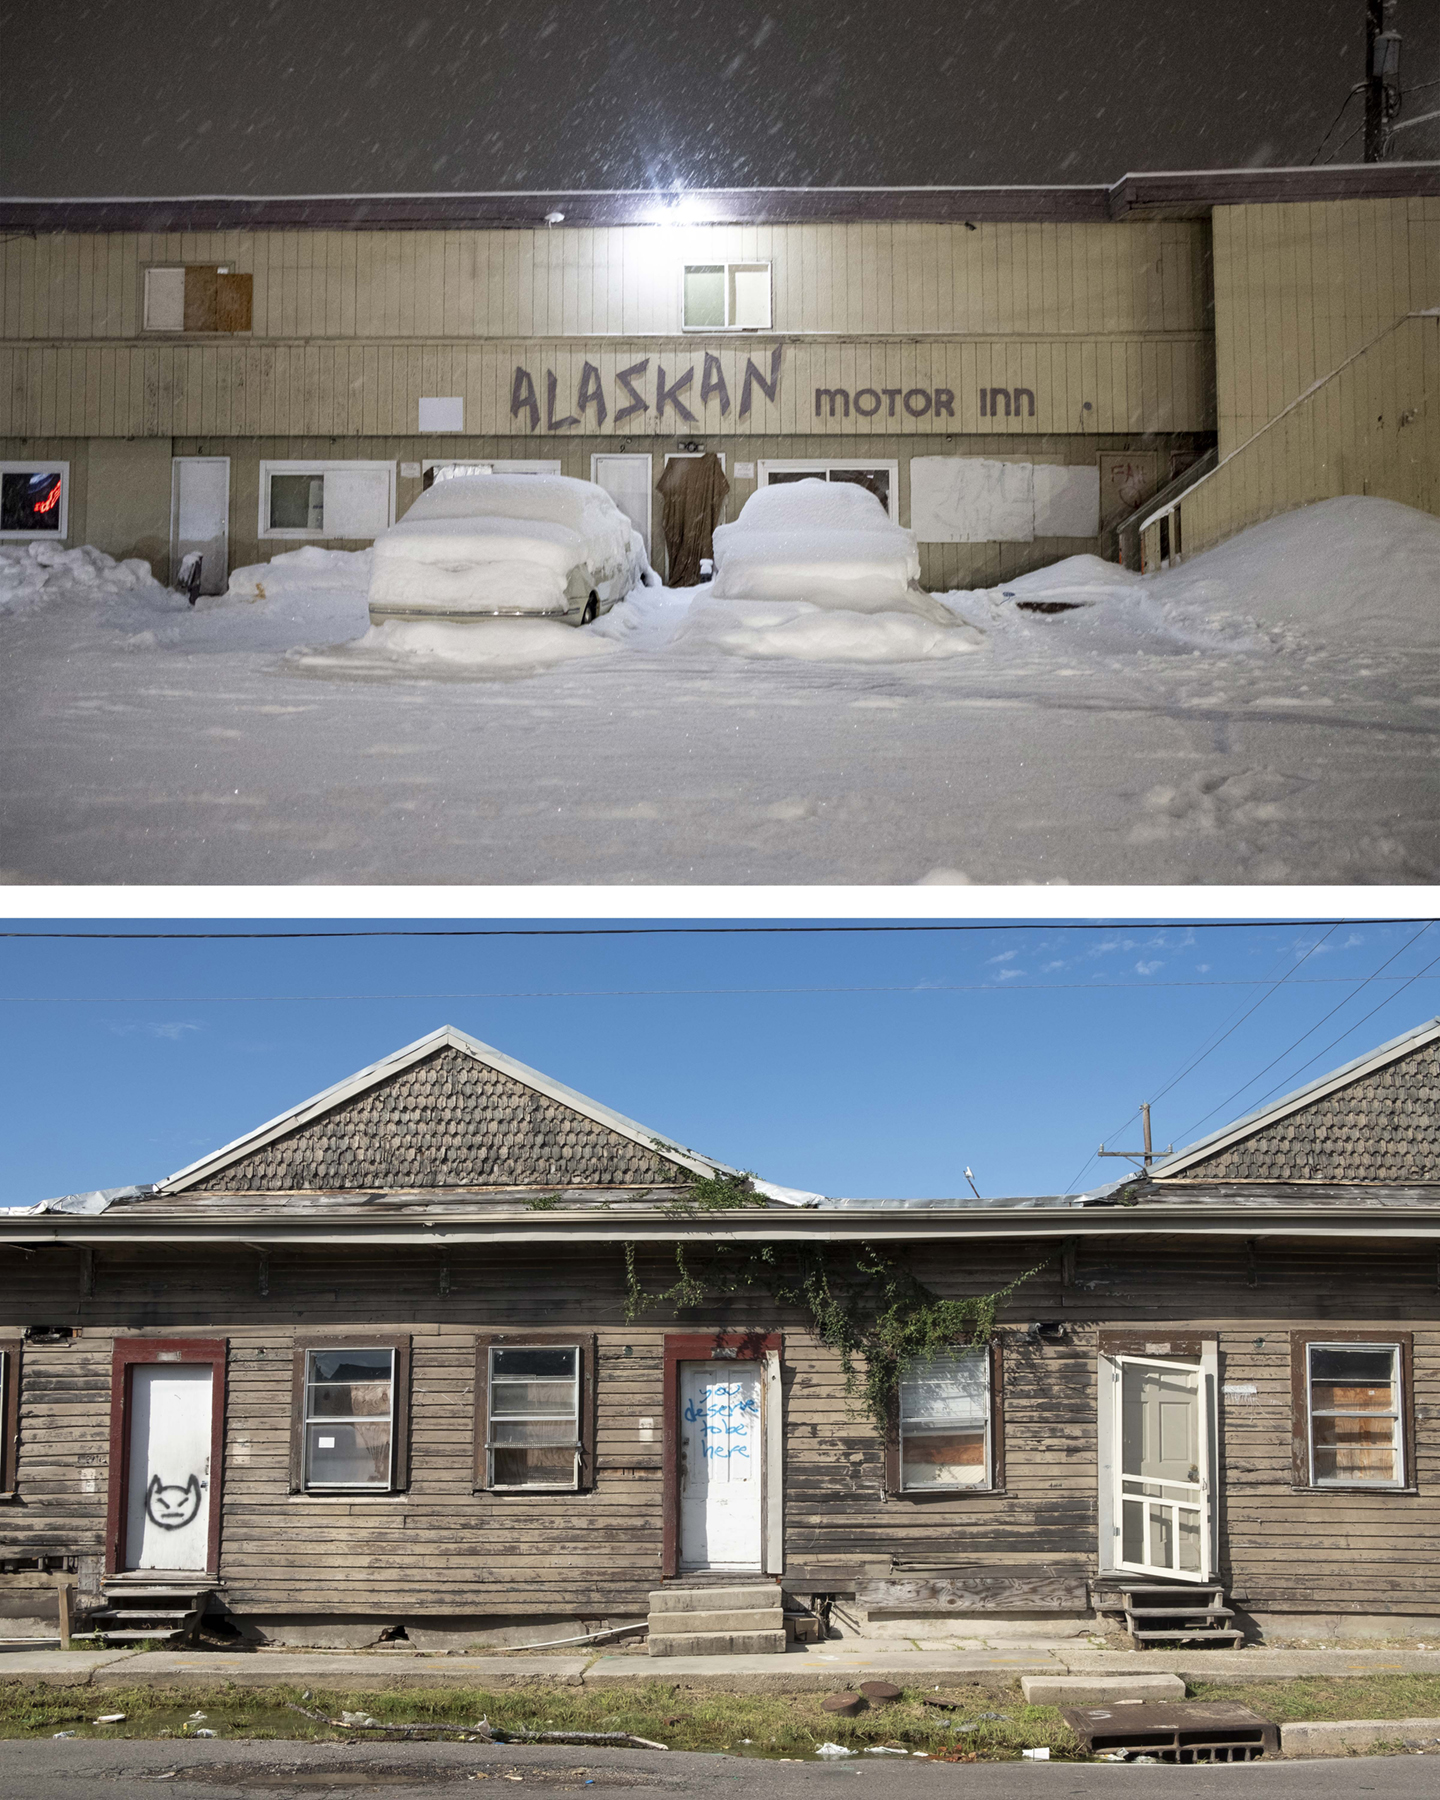 Lodging storefronts in Louisiana and Alaska, courtesy of the artist